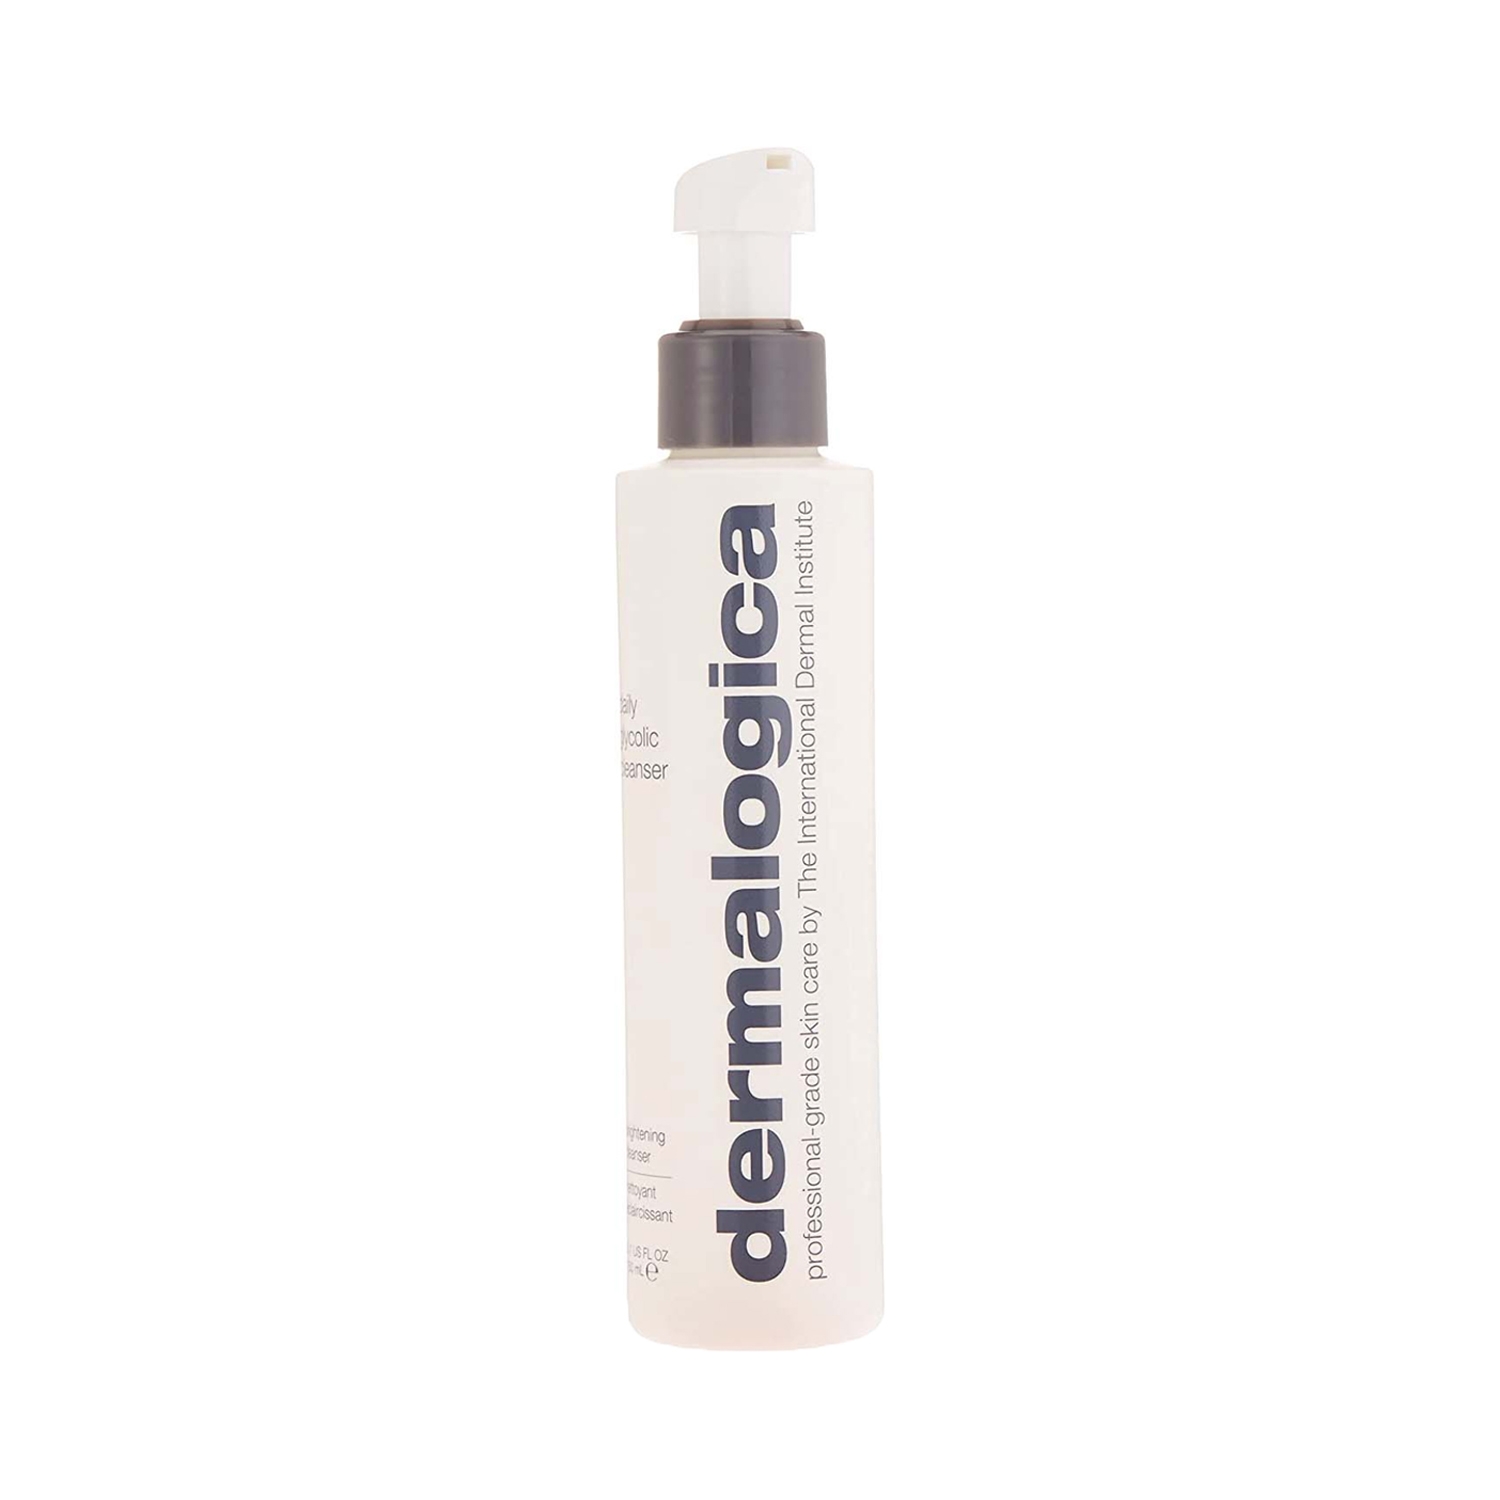 Dermalogica Daily Glycolic Cleanser (150ml)